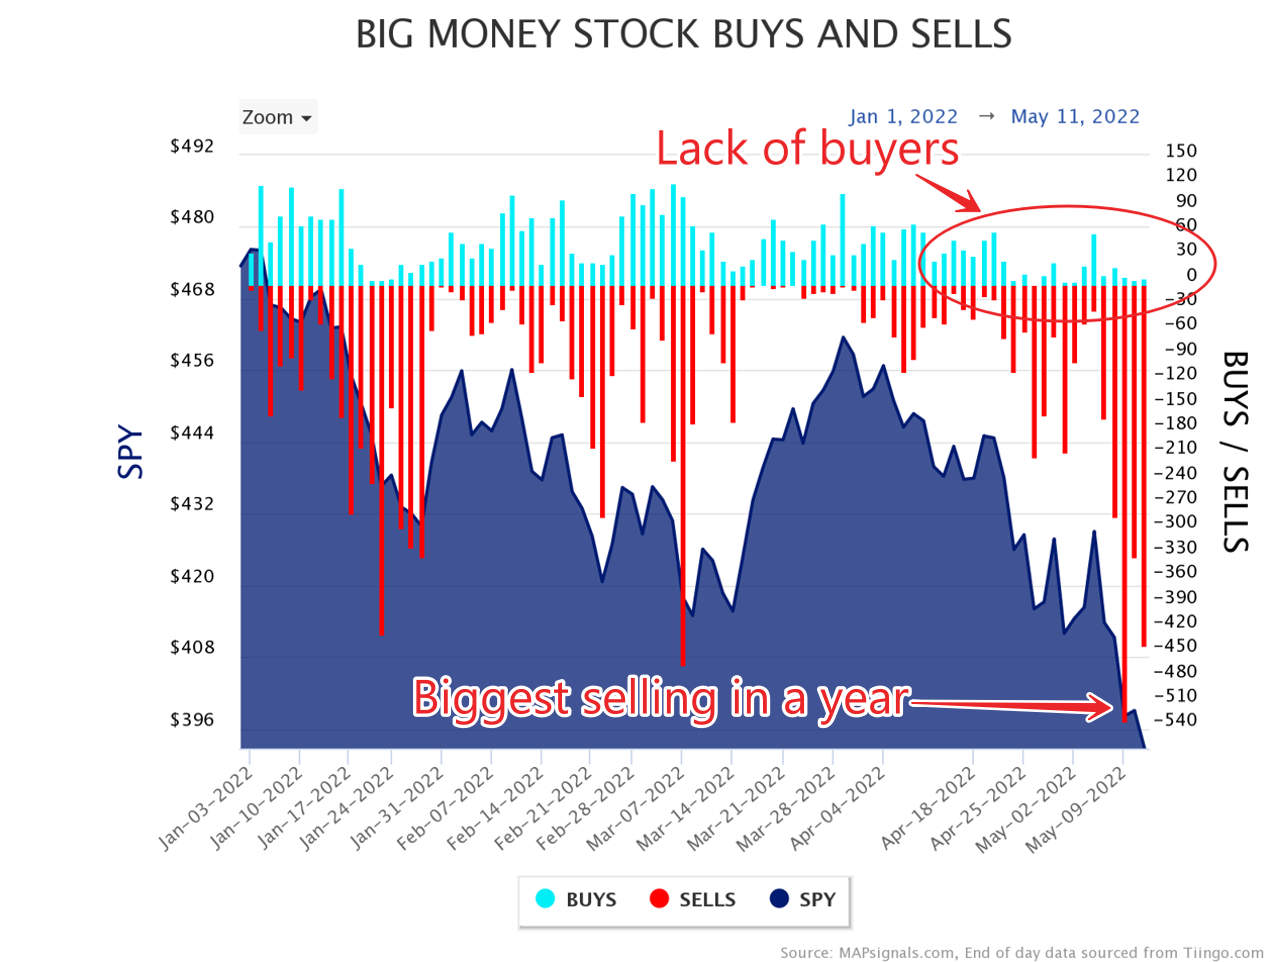 Big Money stock buys and sells | Lack of buyers